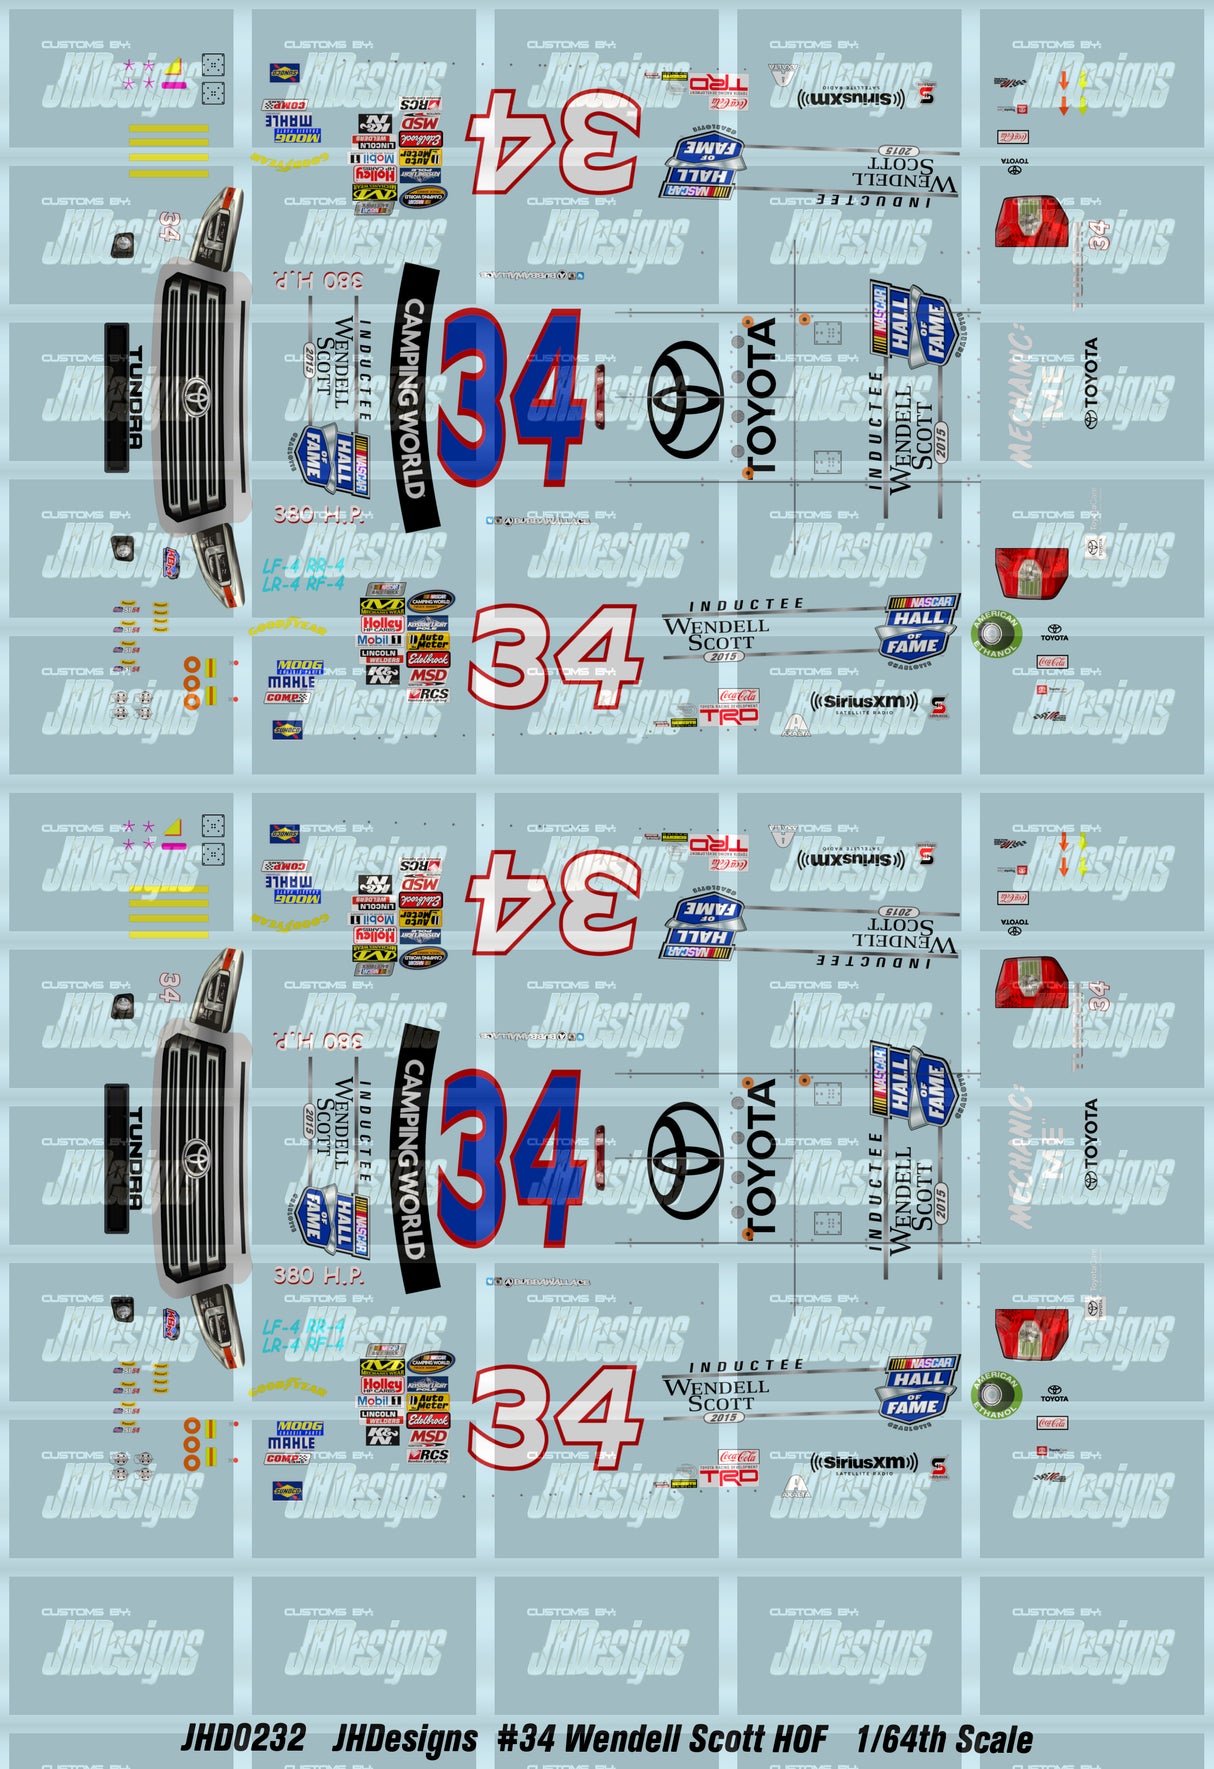 JH Designs Bubba Wallace 2014 CWTS #34 Wendell Scott Hall of Fame (Martinsville Race) 1:64 Racecar Decal Set